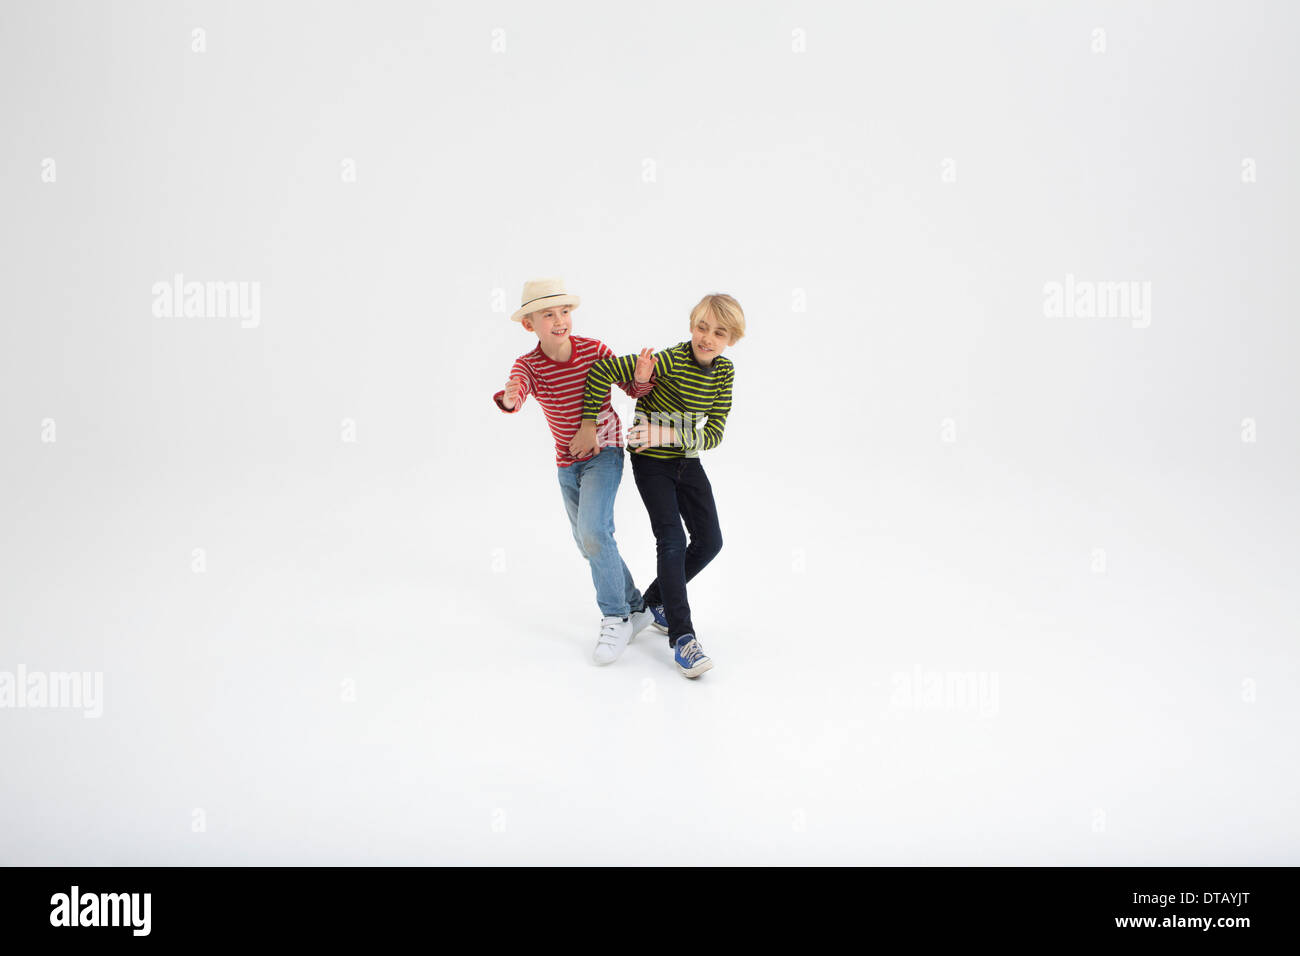 Two boys fighting against white background Stock Photo